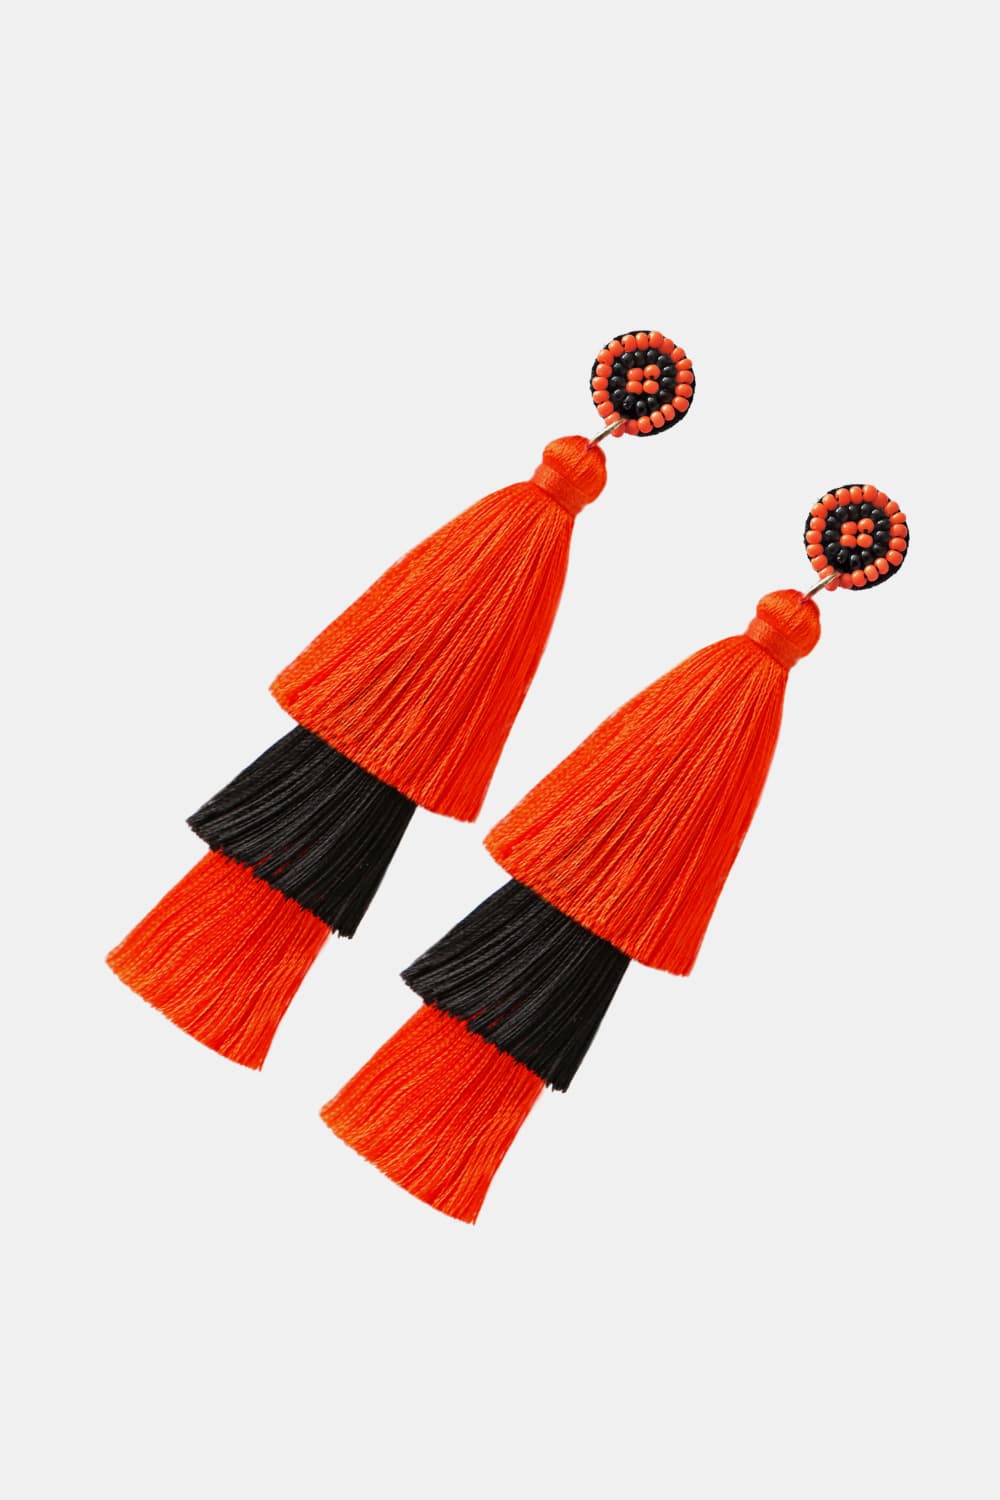 Baeds Detail Triple Layered Tassel Earring  Southern Soul Collectives 